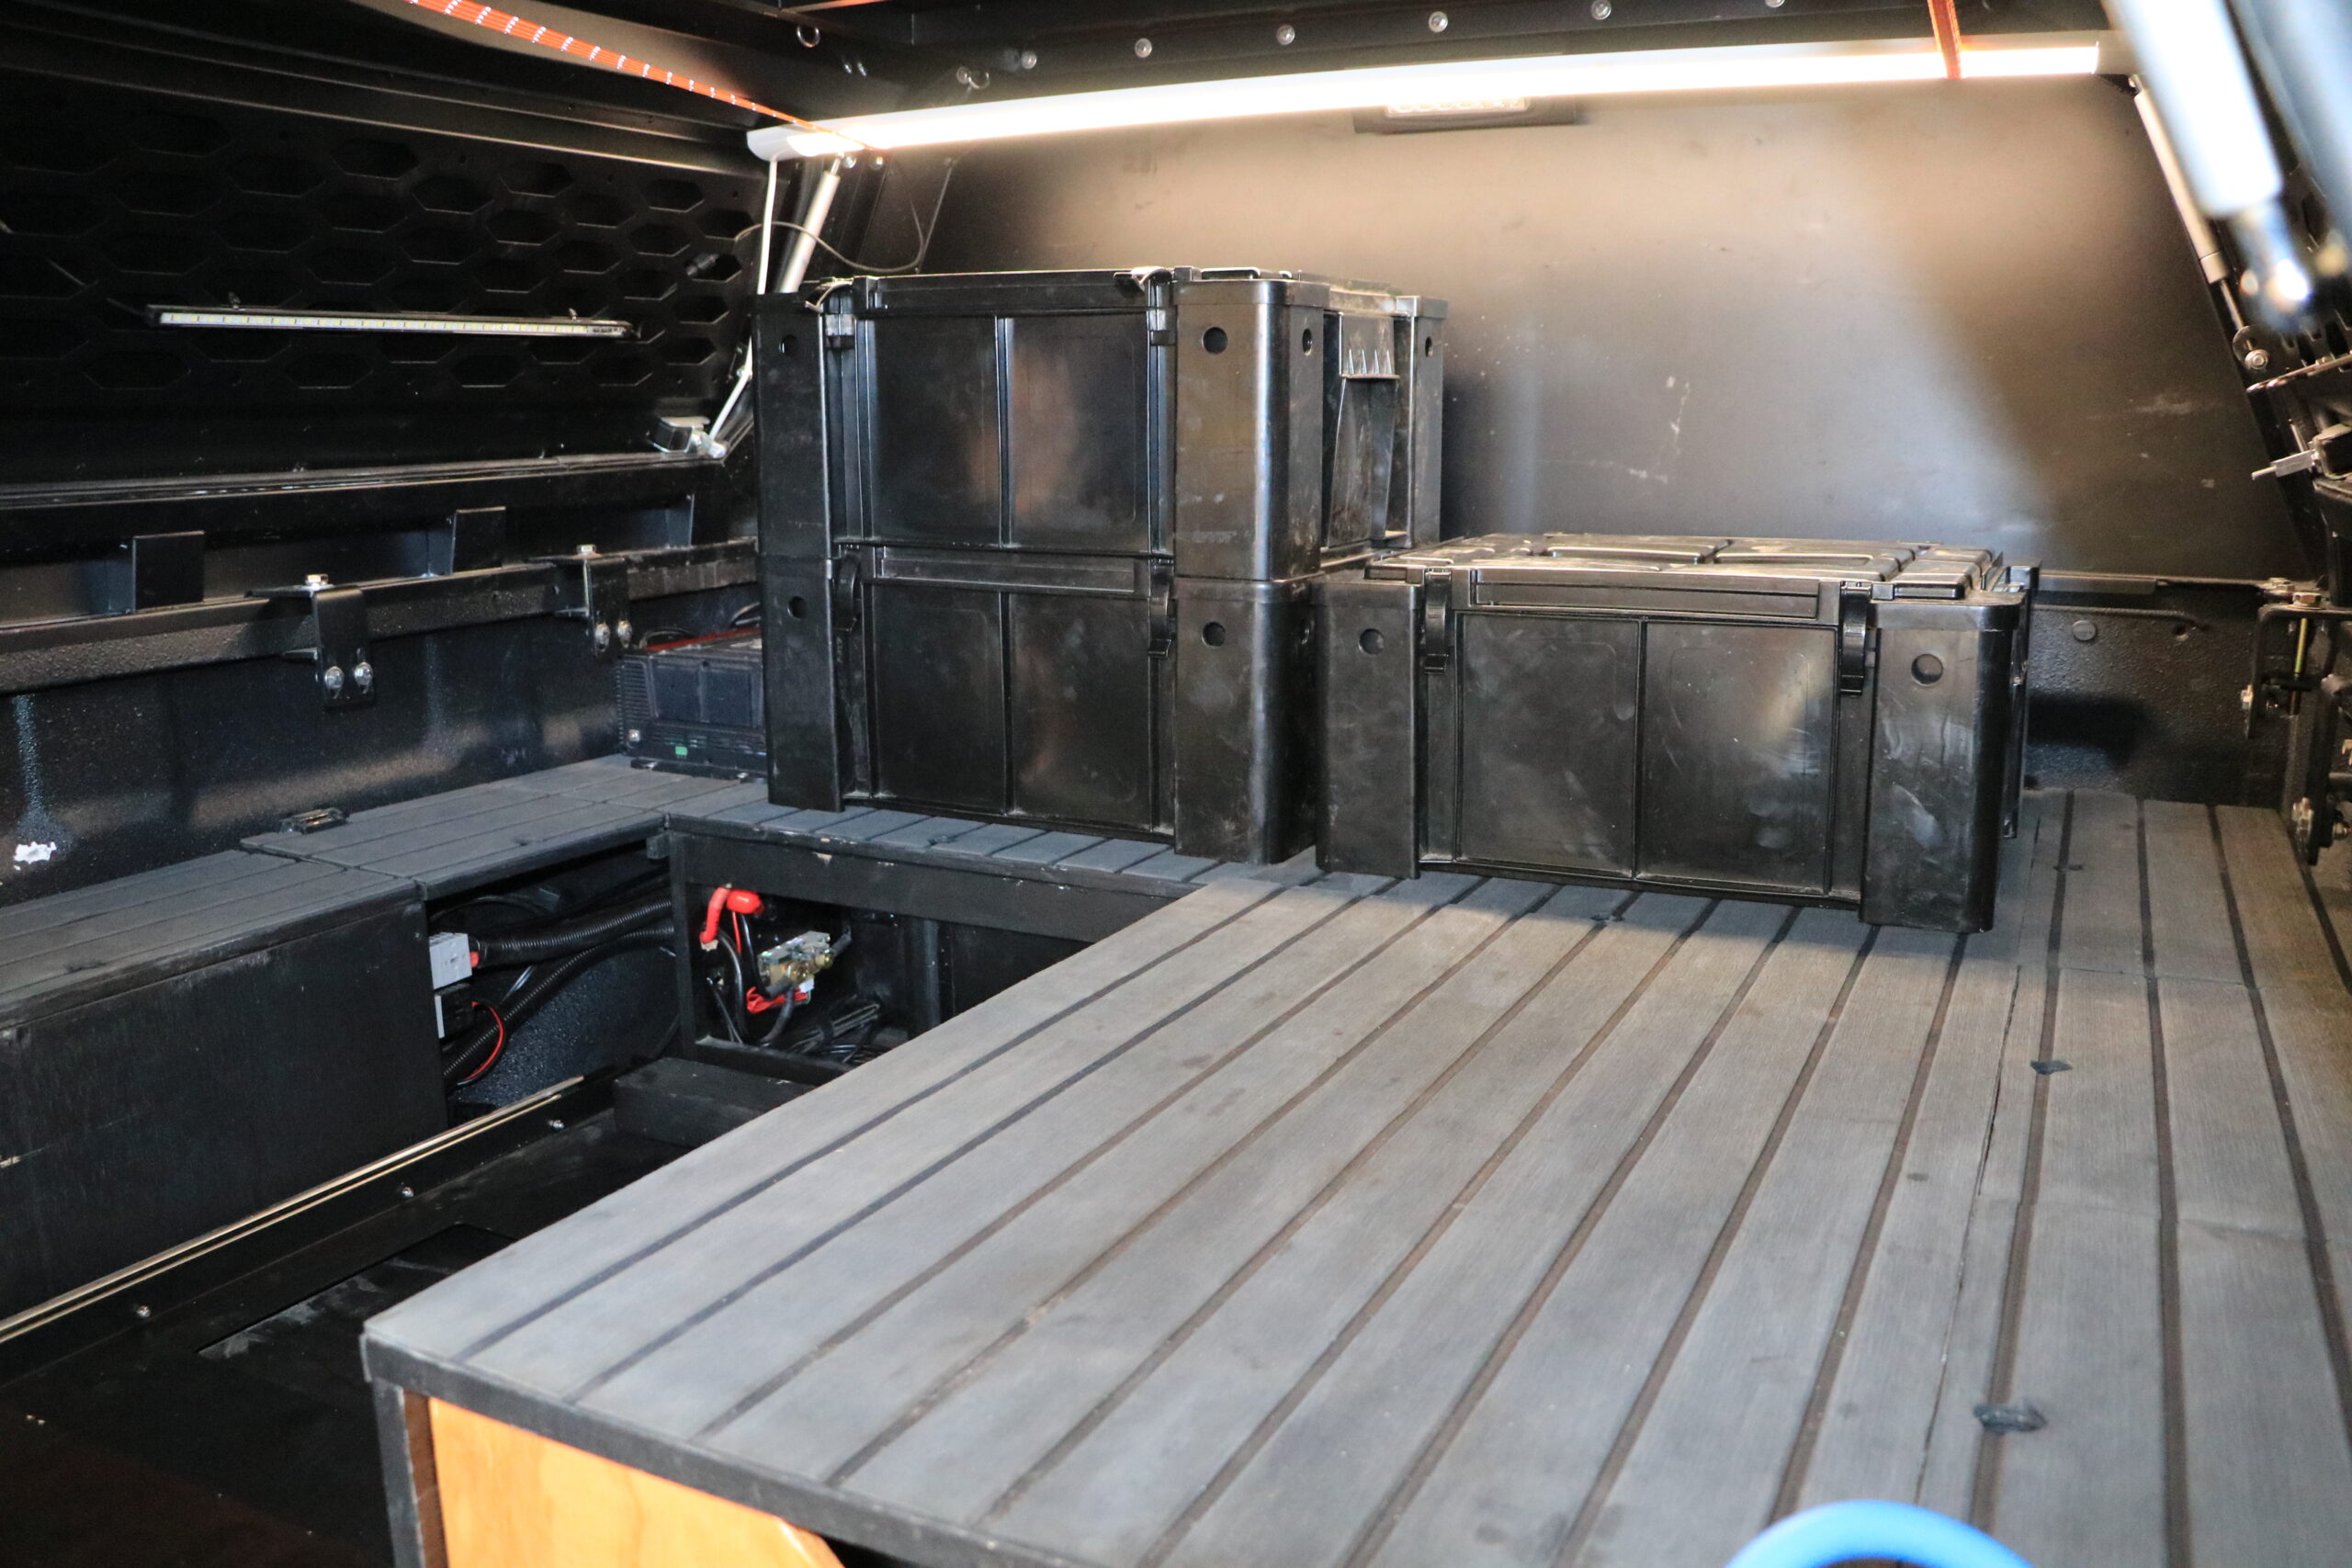 Aluminium ute tub canopy setup for touring with a truck bed. fitout ideas camping layout and plan.